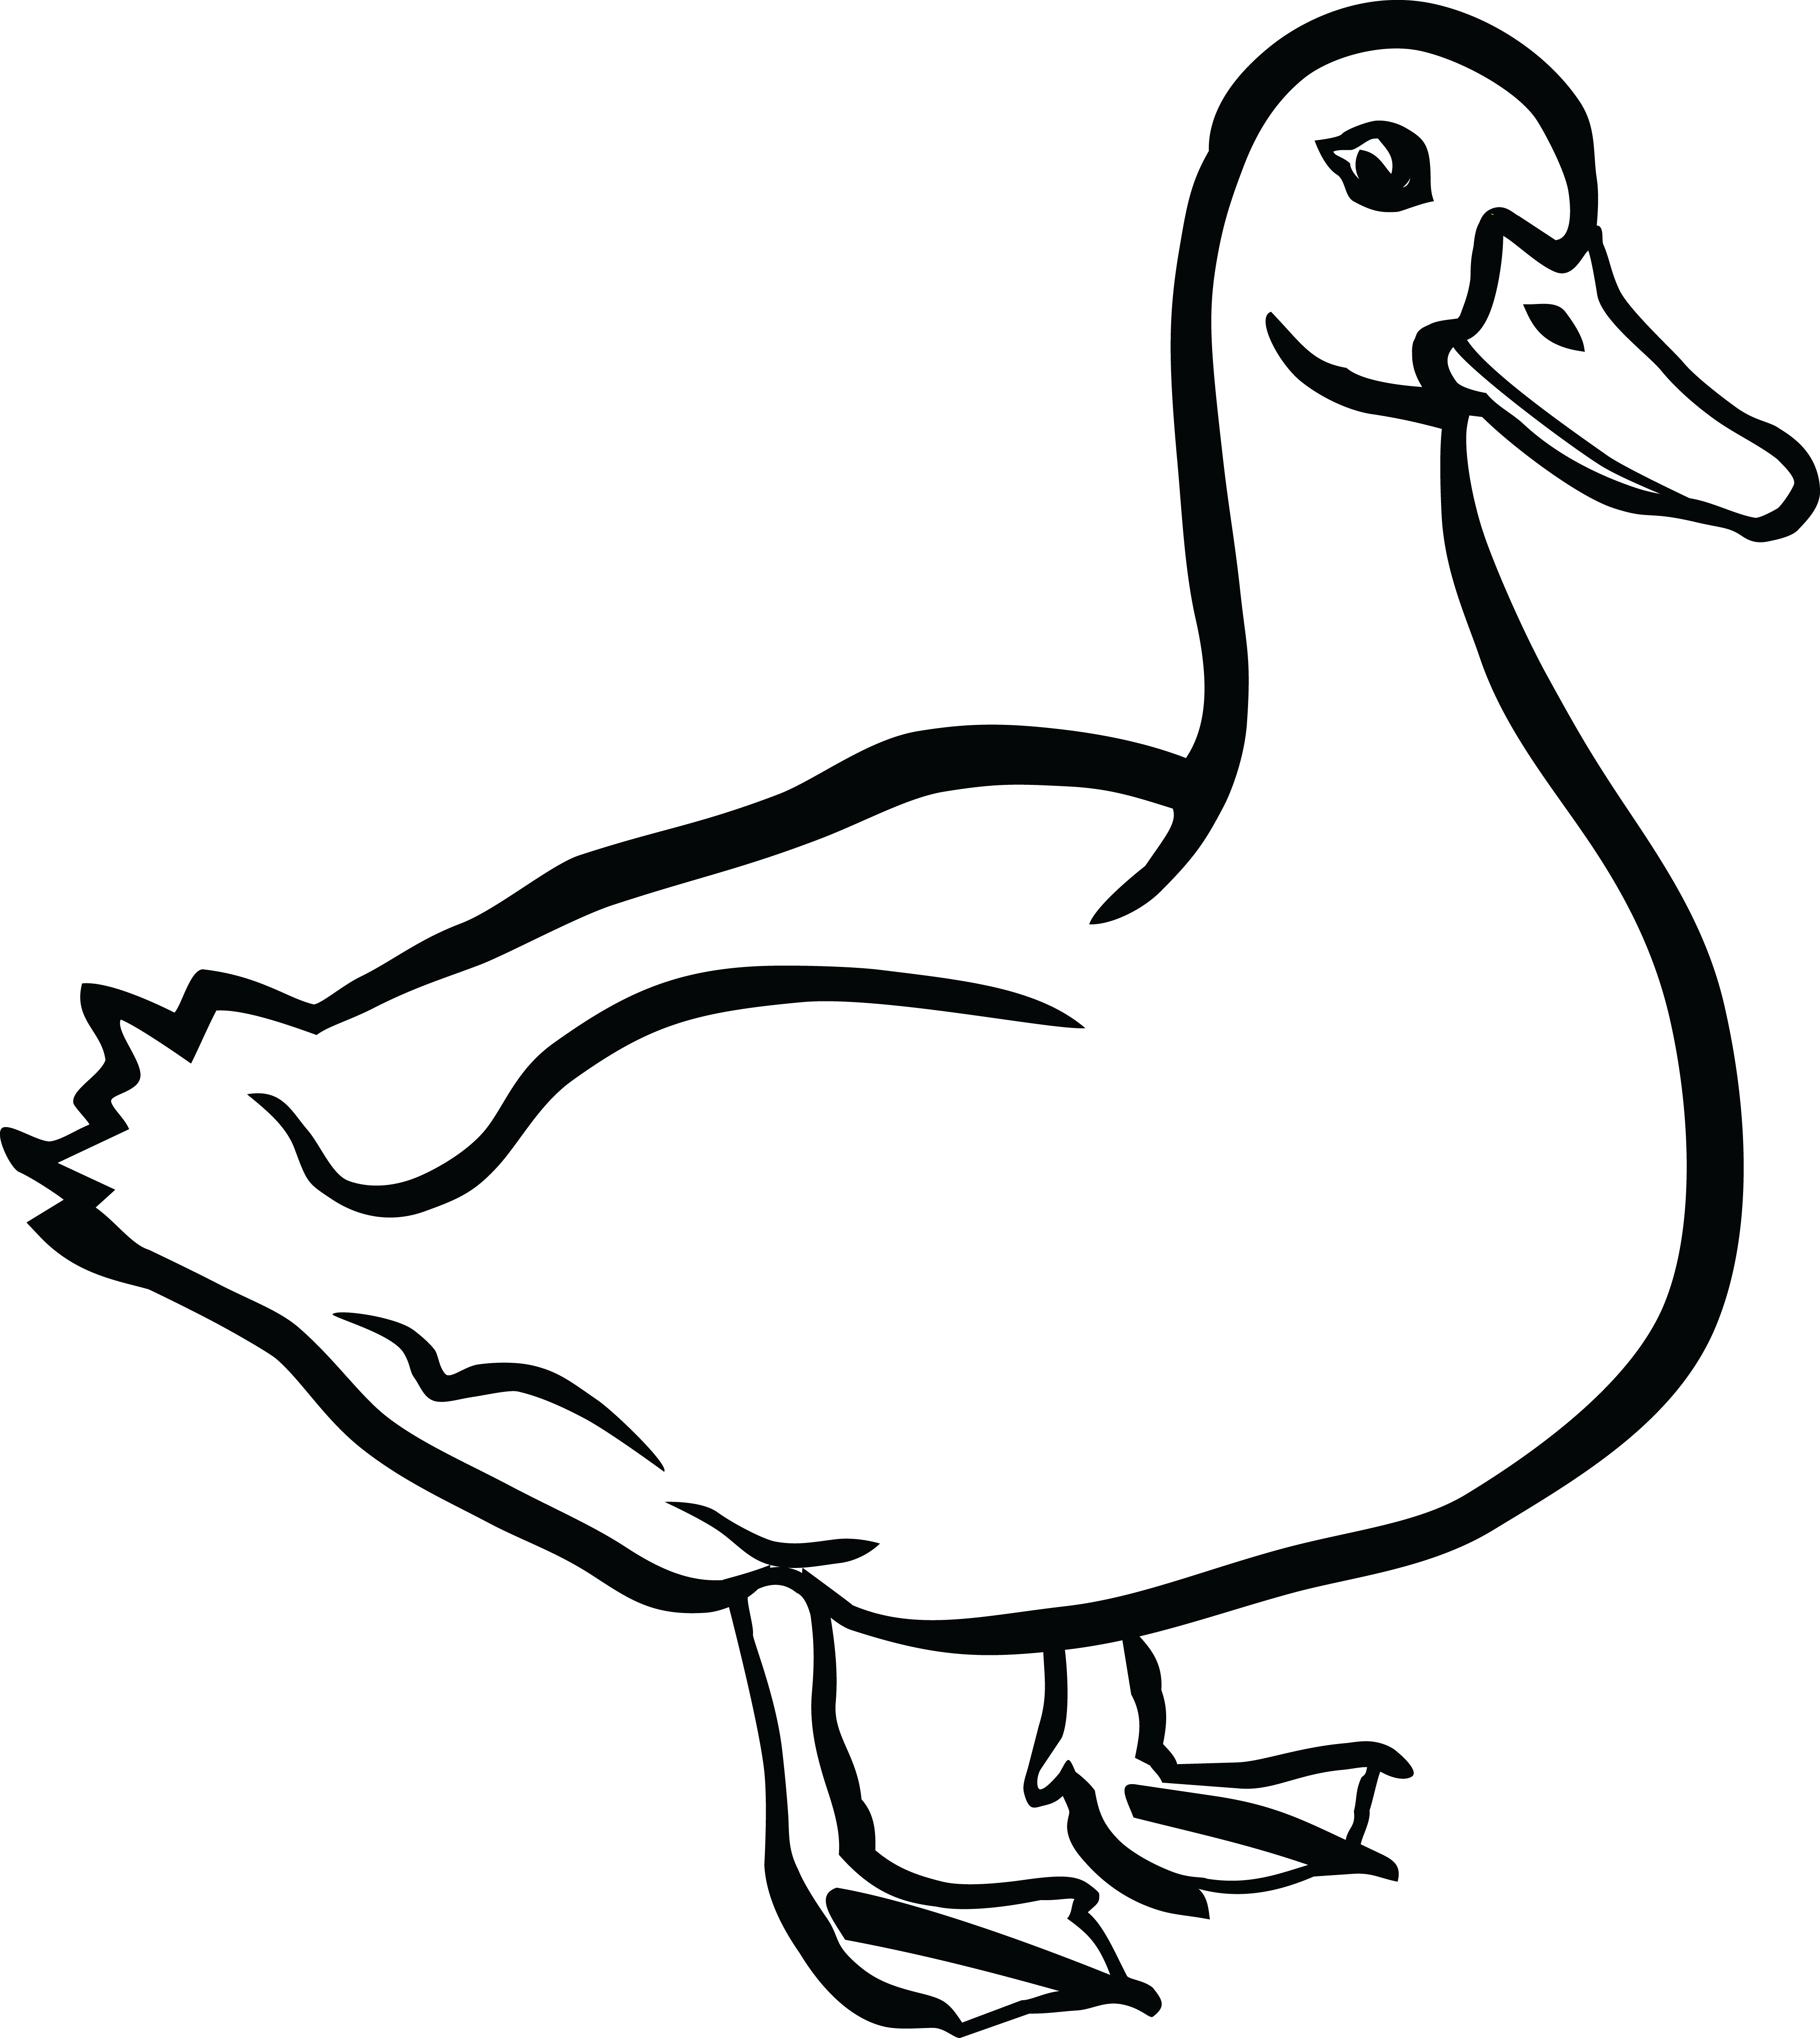 Duck carving patterns pinterest. Zucchini clipart black and white